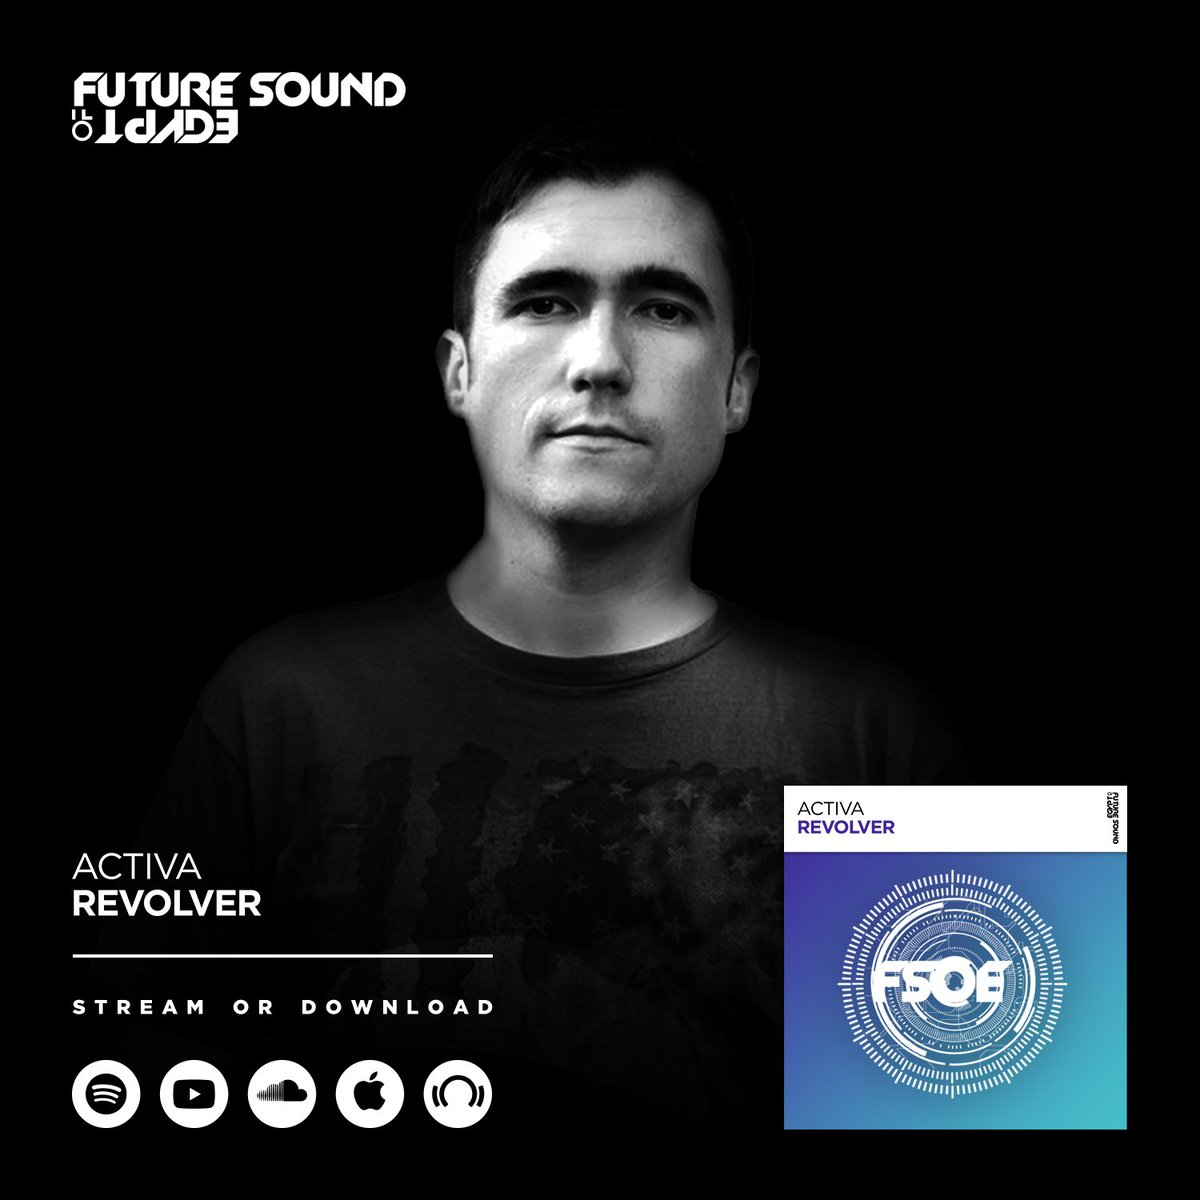 A pleasure to have @ActivaMusic back on FSOE! This time with 'Revolver' 💙 FSOE.lnk.to/Revolver https://t.co/lrKnr8G4eM